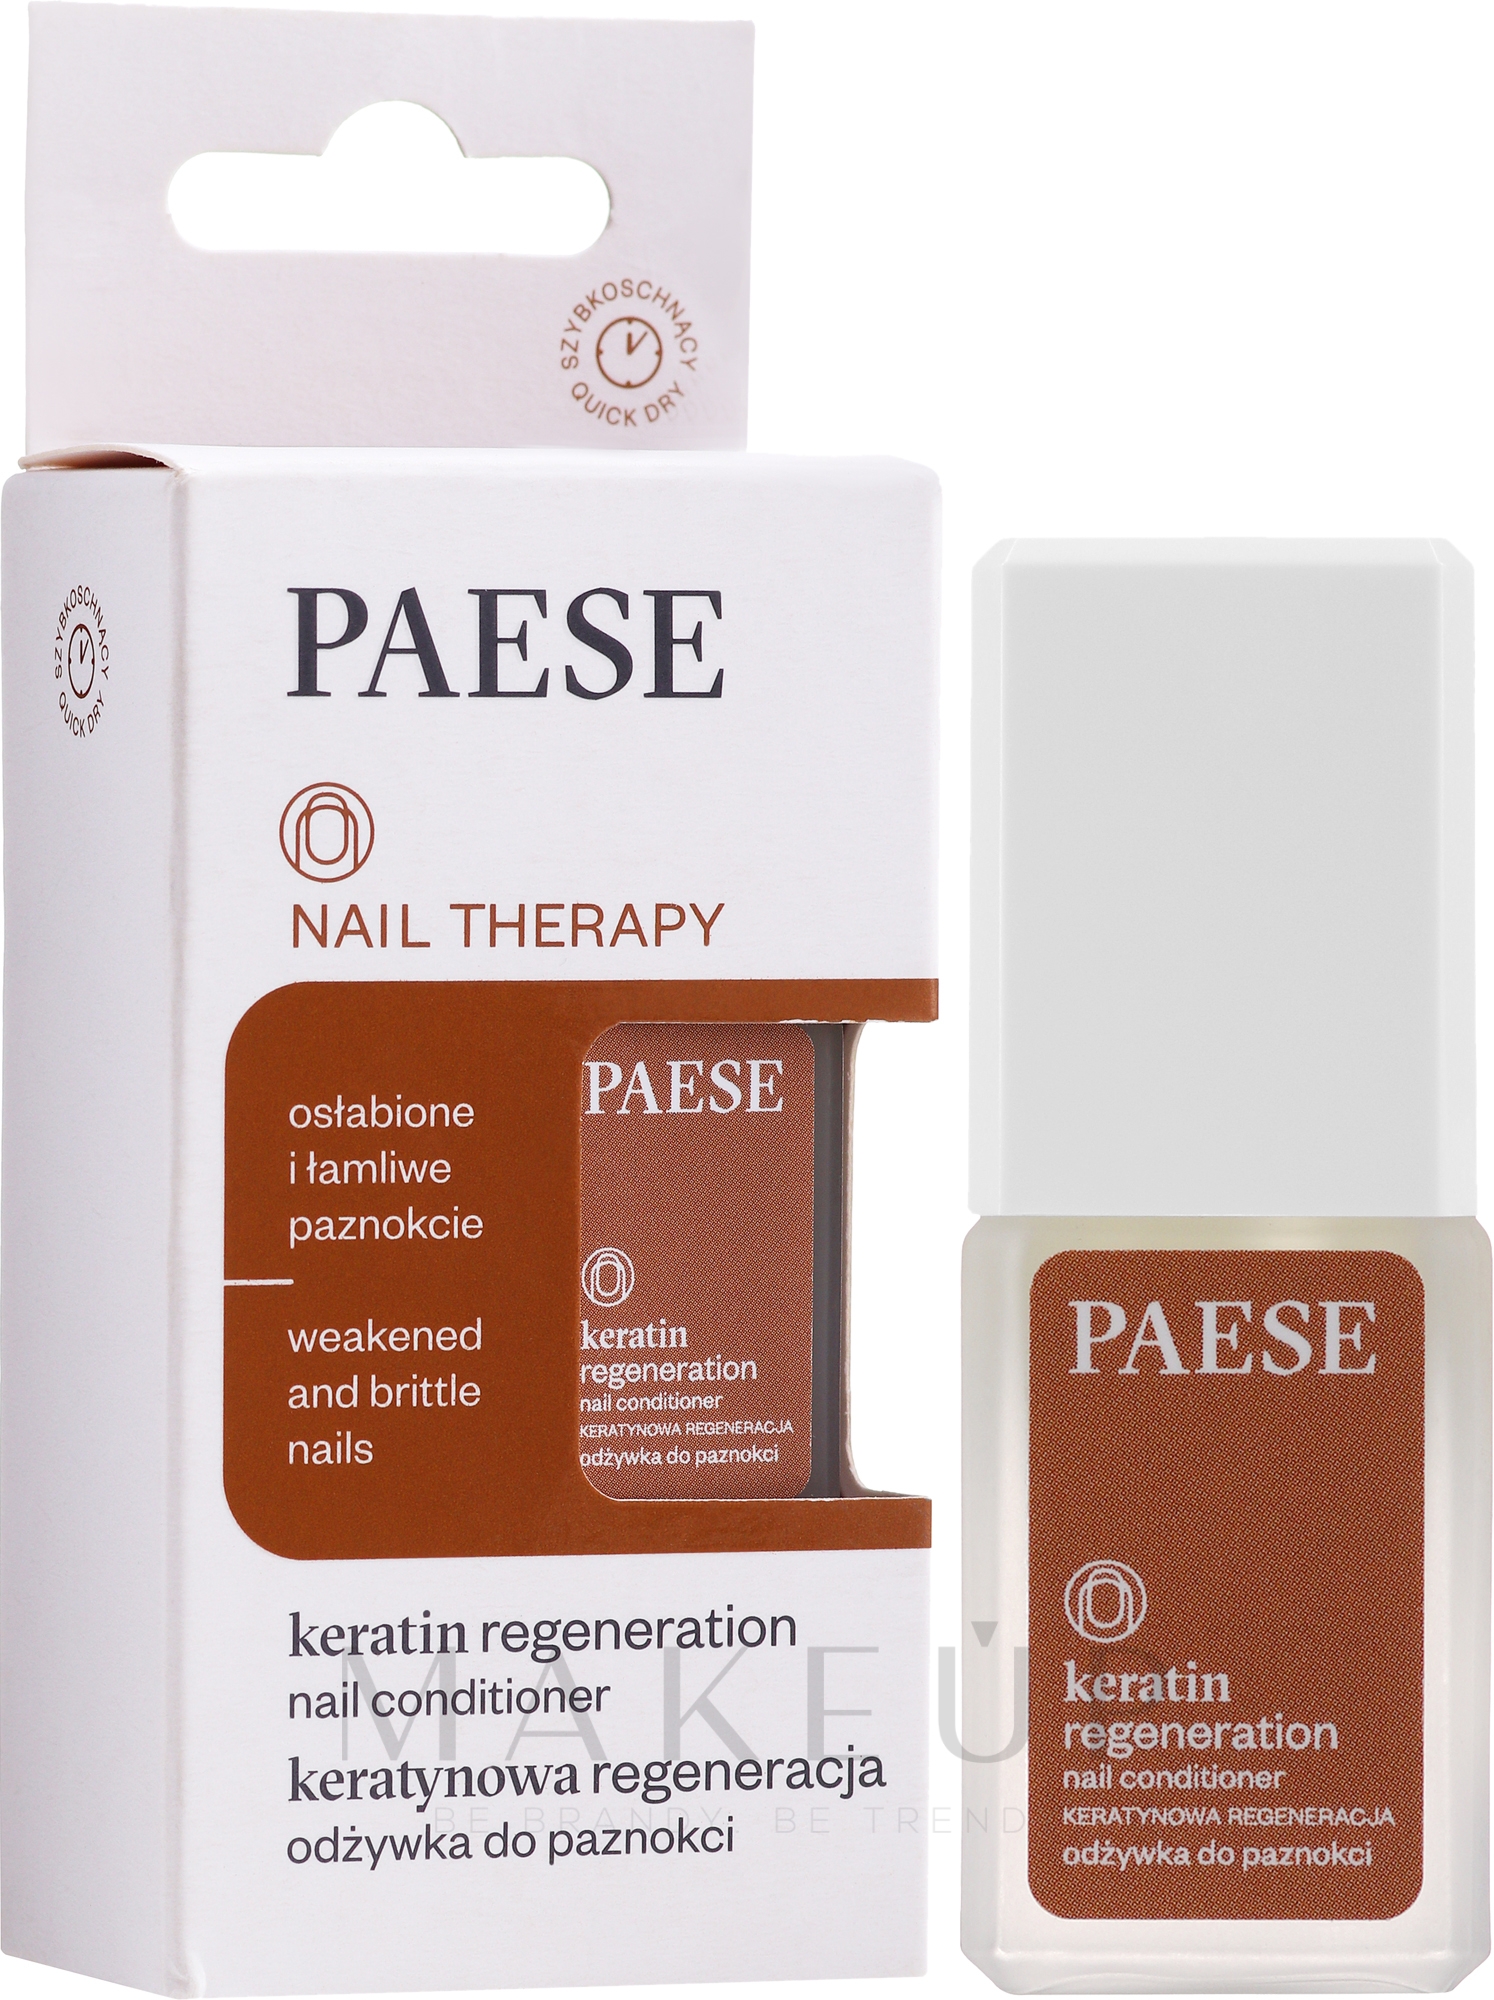 Regenerierender Nagelconditioner mit Keratin - Paese Nail Therapy Keratin Regeneration Nail Conditioner — Foto 8 ml